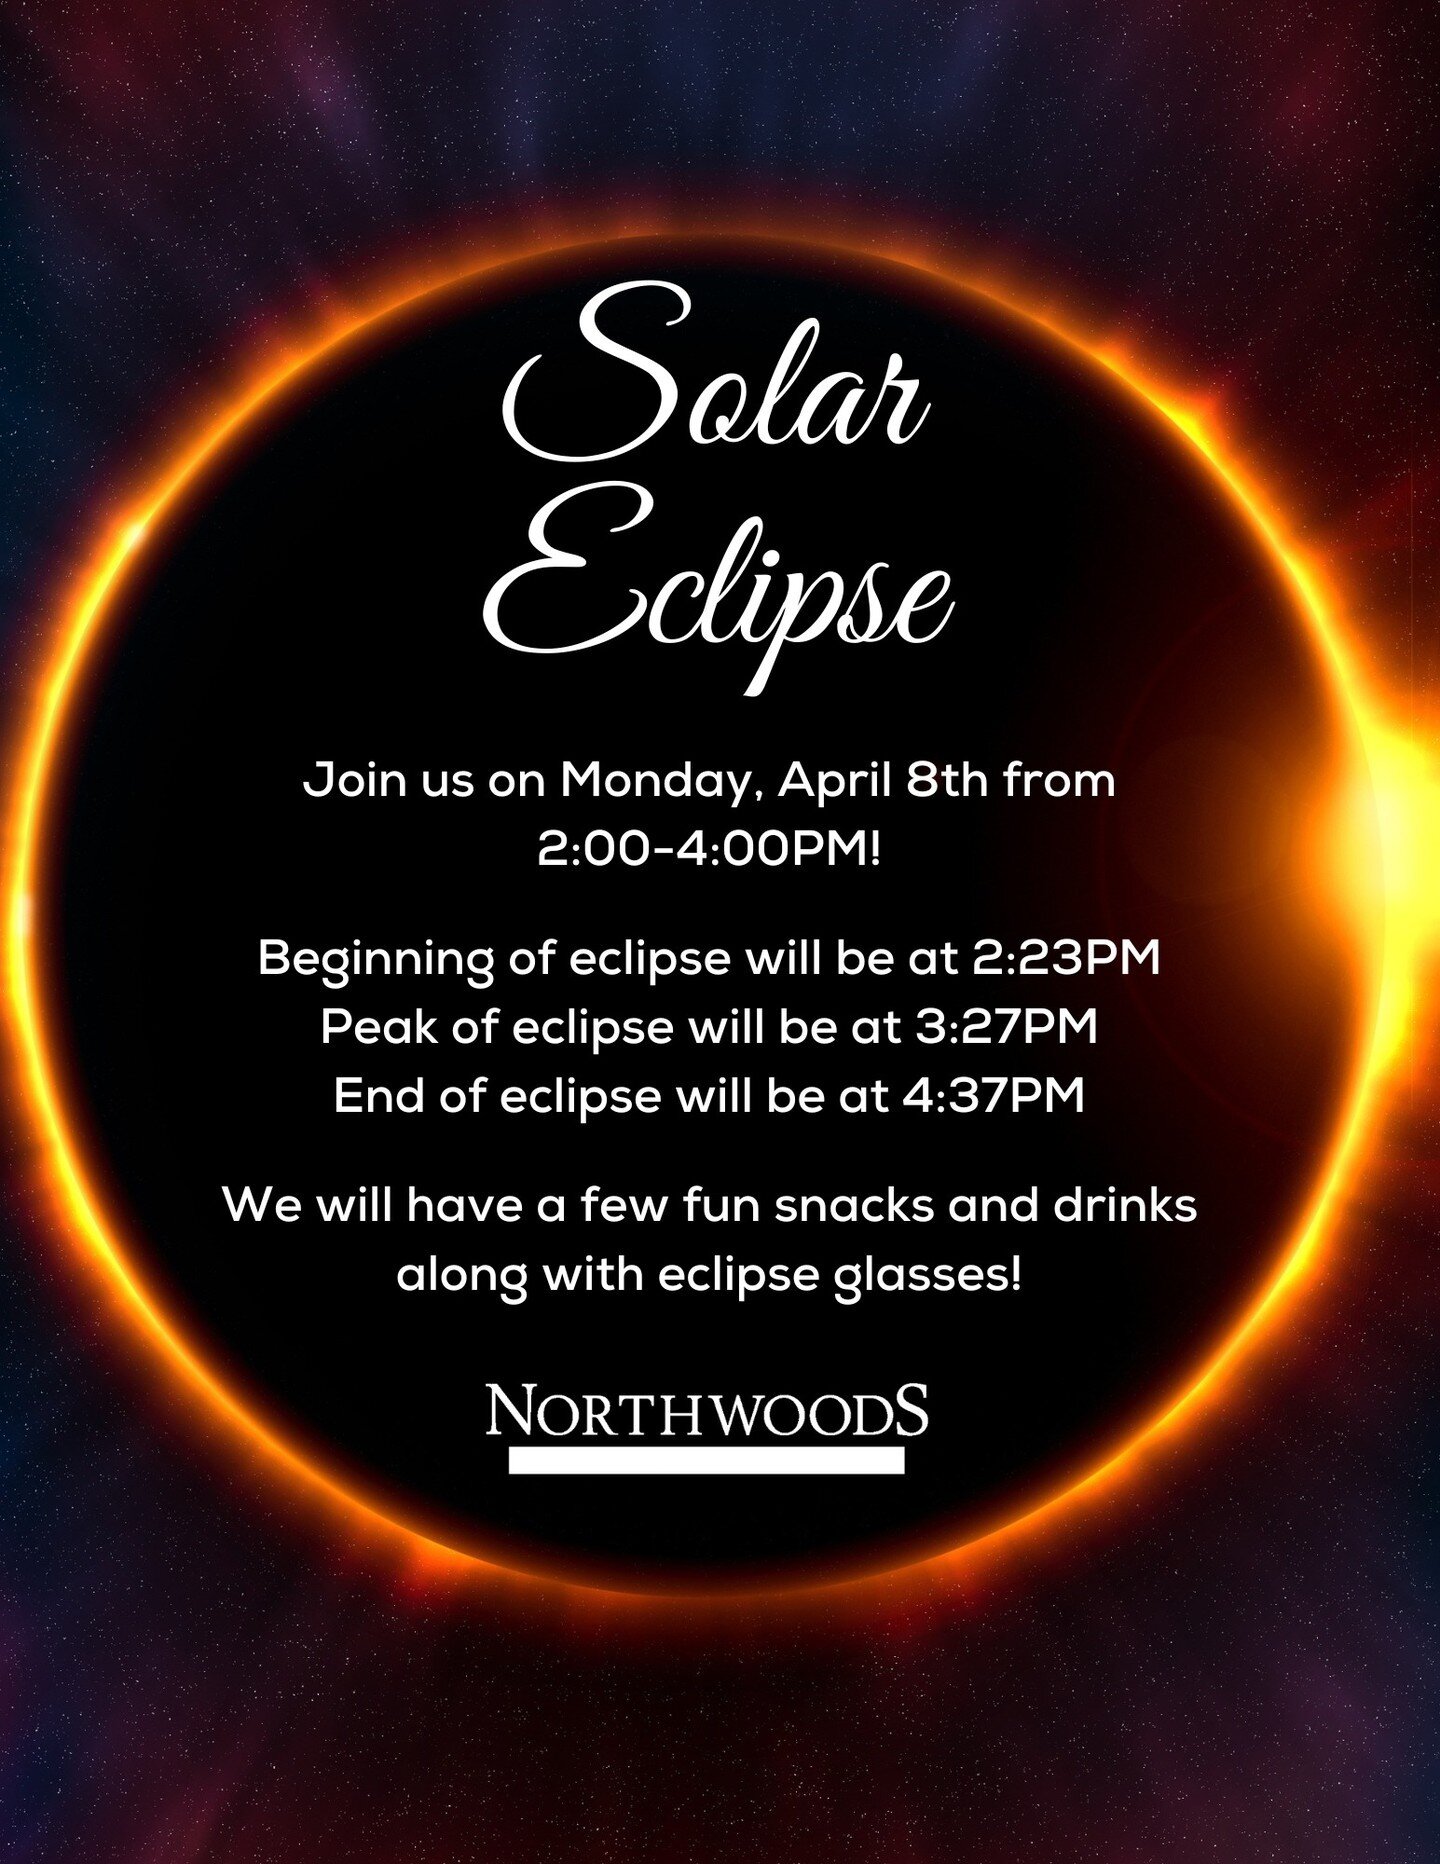 Join us on Monday, April 8th, to view the eclipse! Grab some snacks and drinks and make sure you wear one of our eclipse glasses for viewing! We can't wait to see you all there. ☀️🌑

#solareclipse #eclipse #residentevents #events #residents #lovewhe